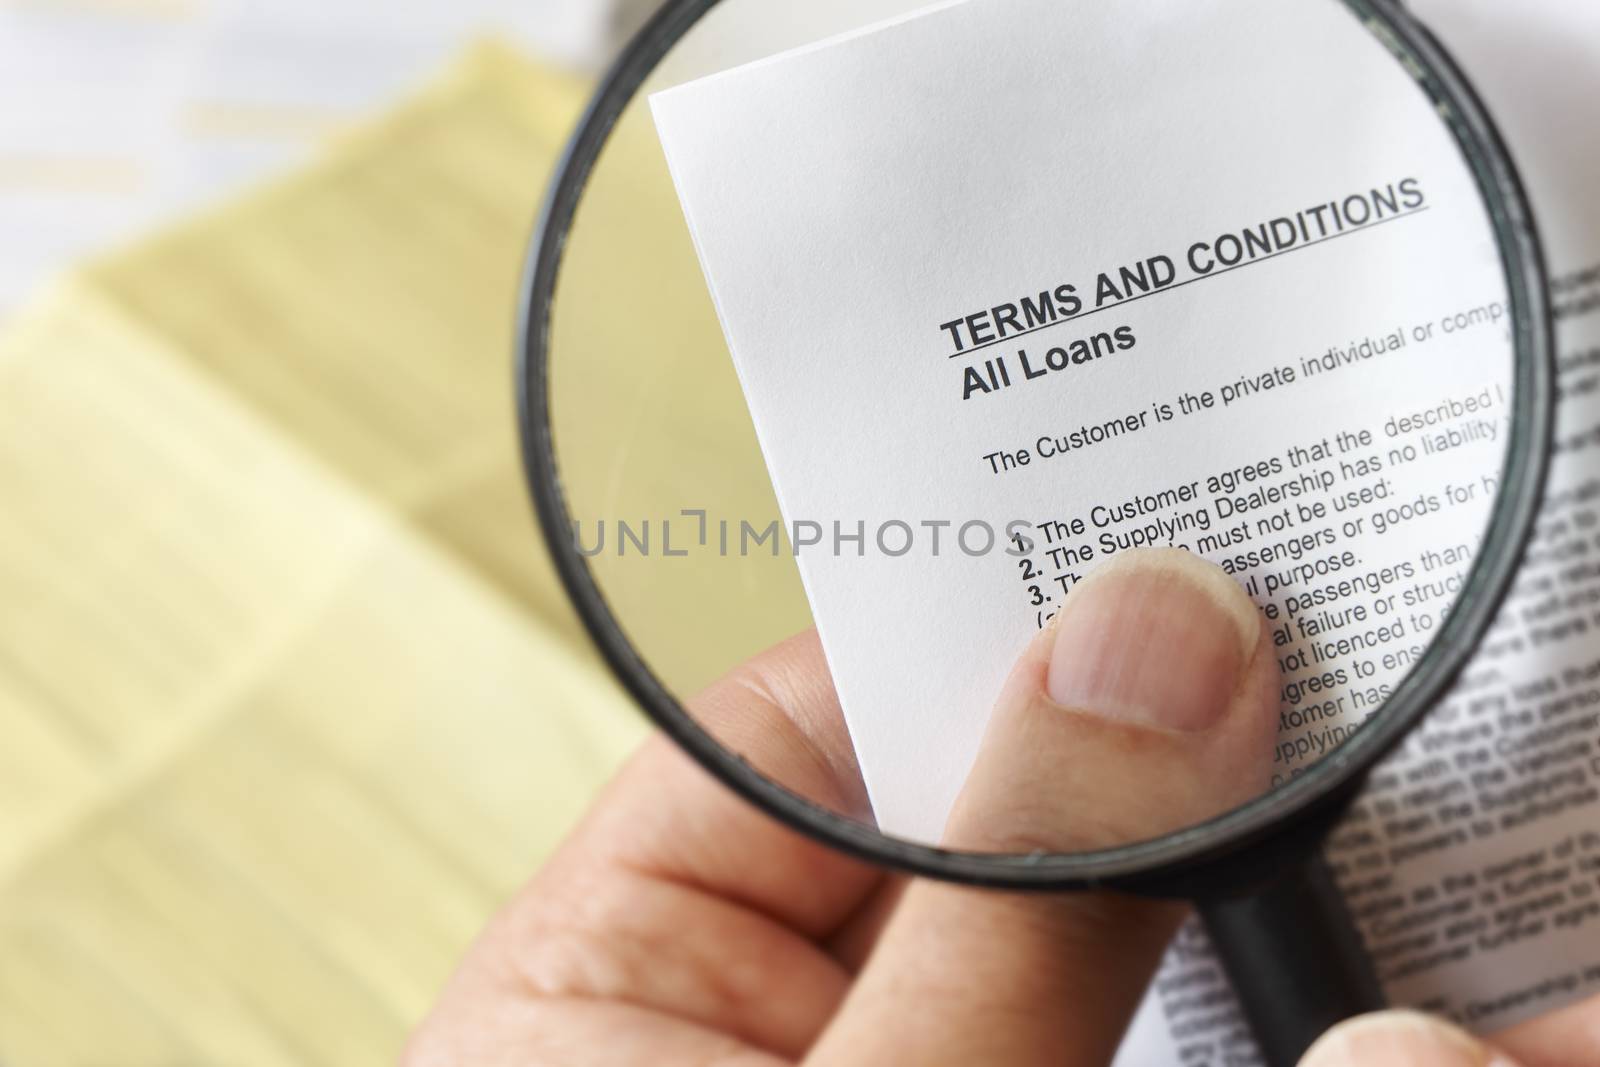 hands holding magnifying glass reading terms and conditions of loan agreement